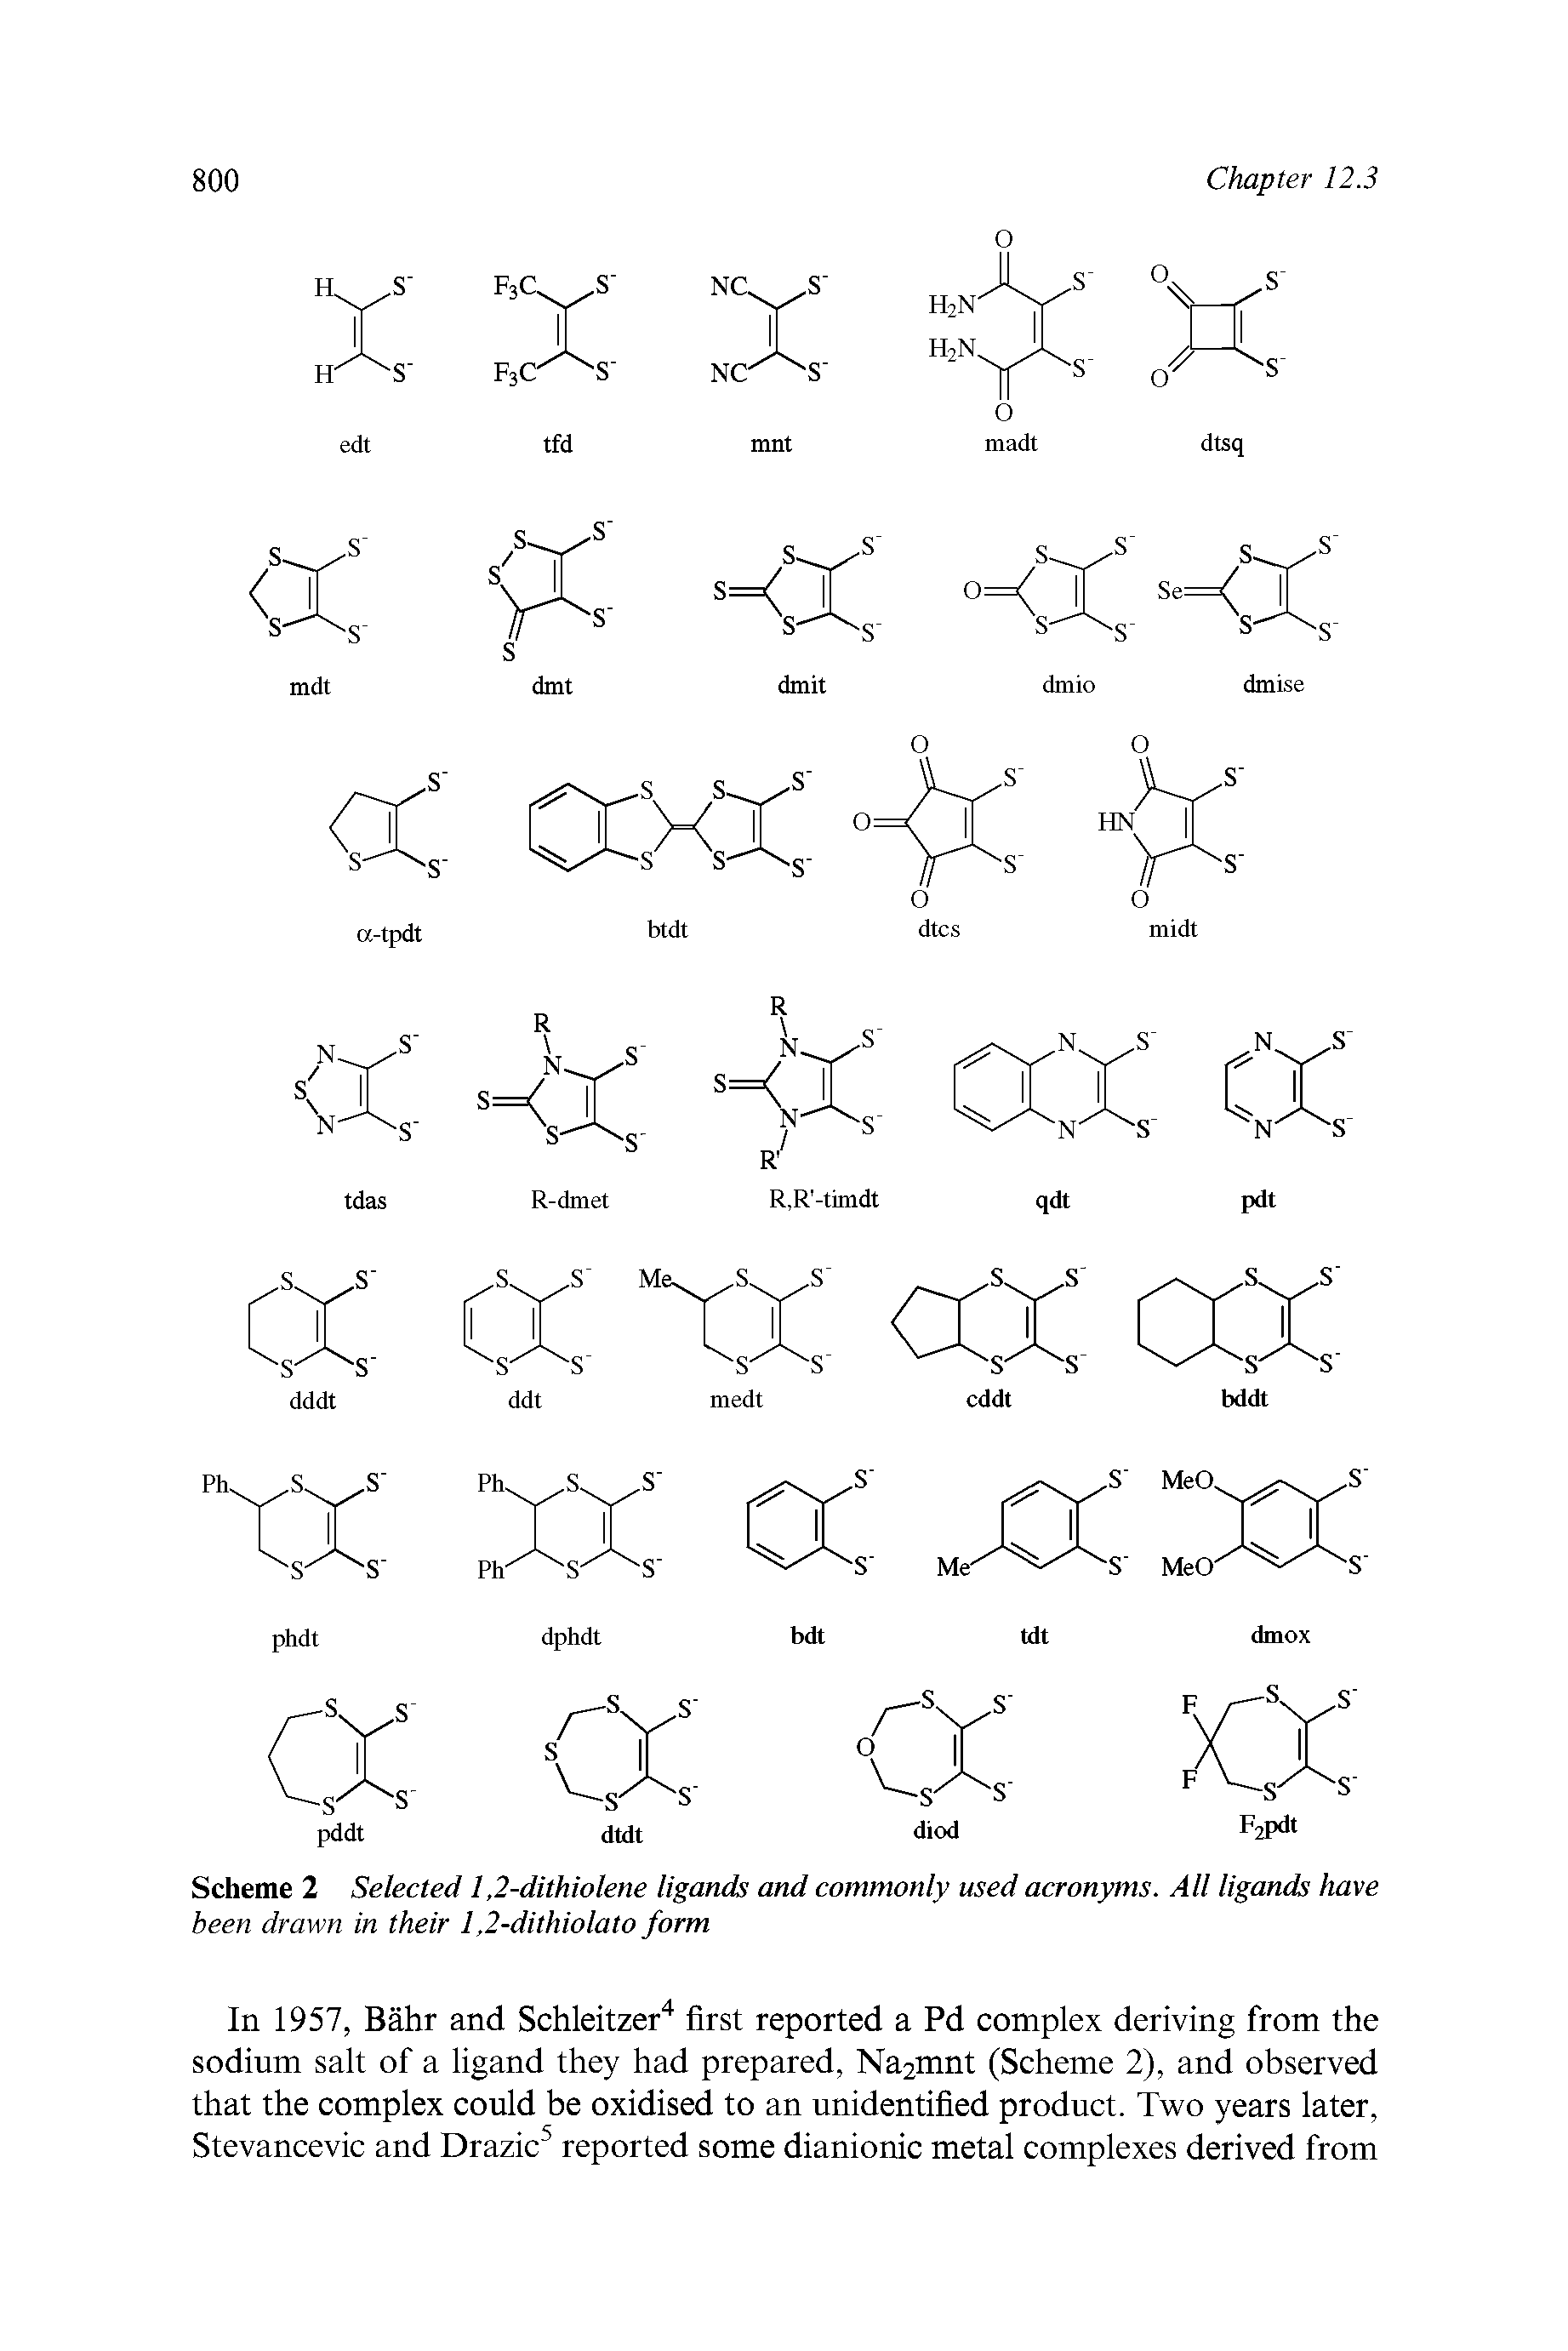 Scheme 2 Selected 1,2-dithiolene ligands and commonly used acronyms. All ligands have been drawn in their 1,2-dithiolato form...